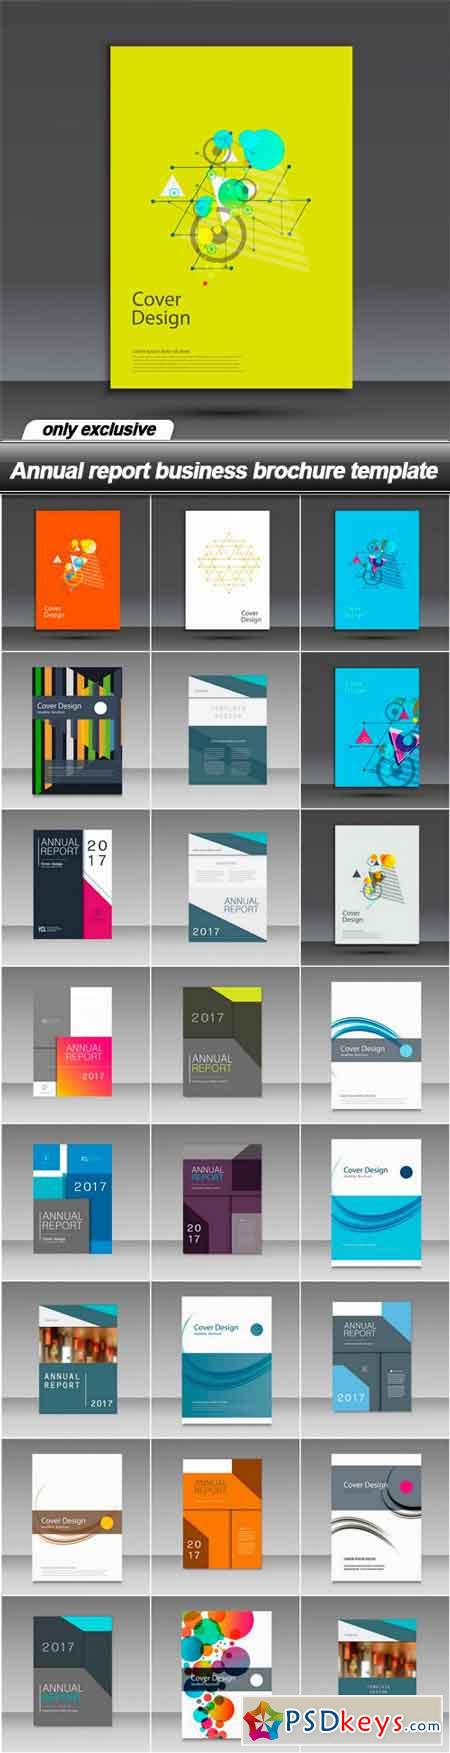 Annual report business brochure template - 25 EPS